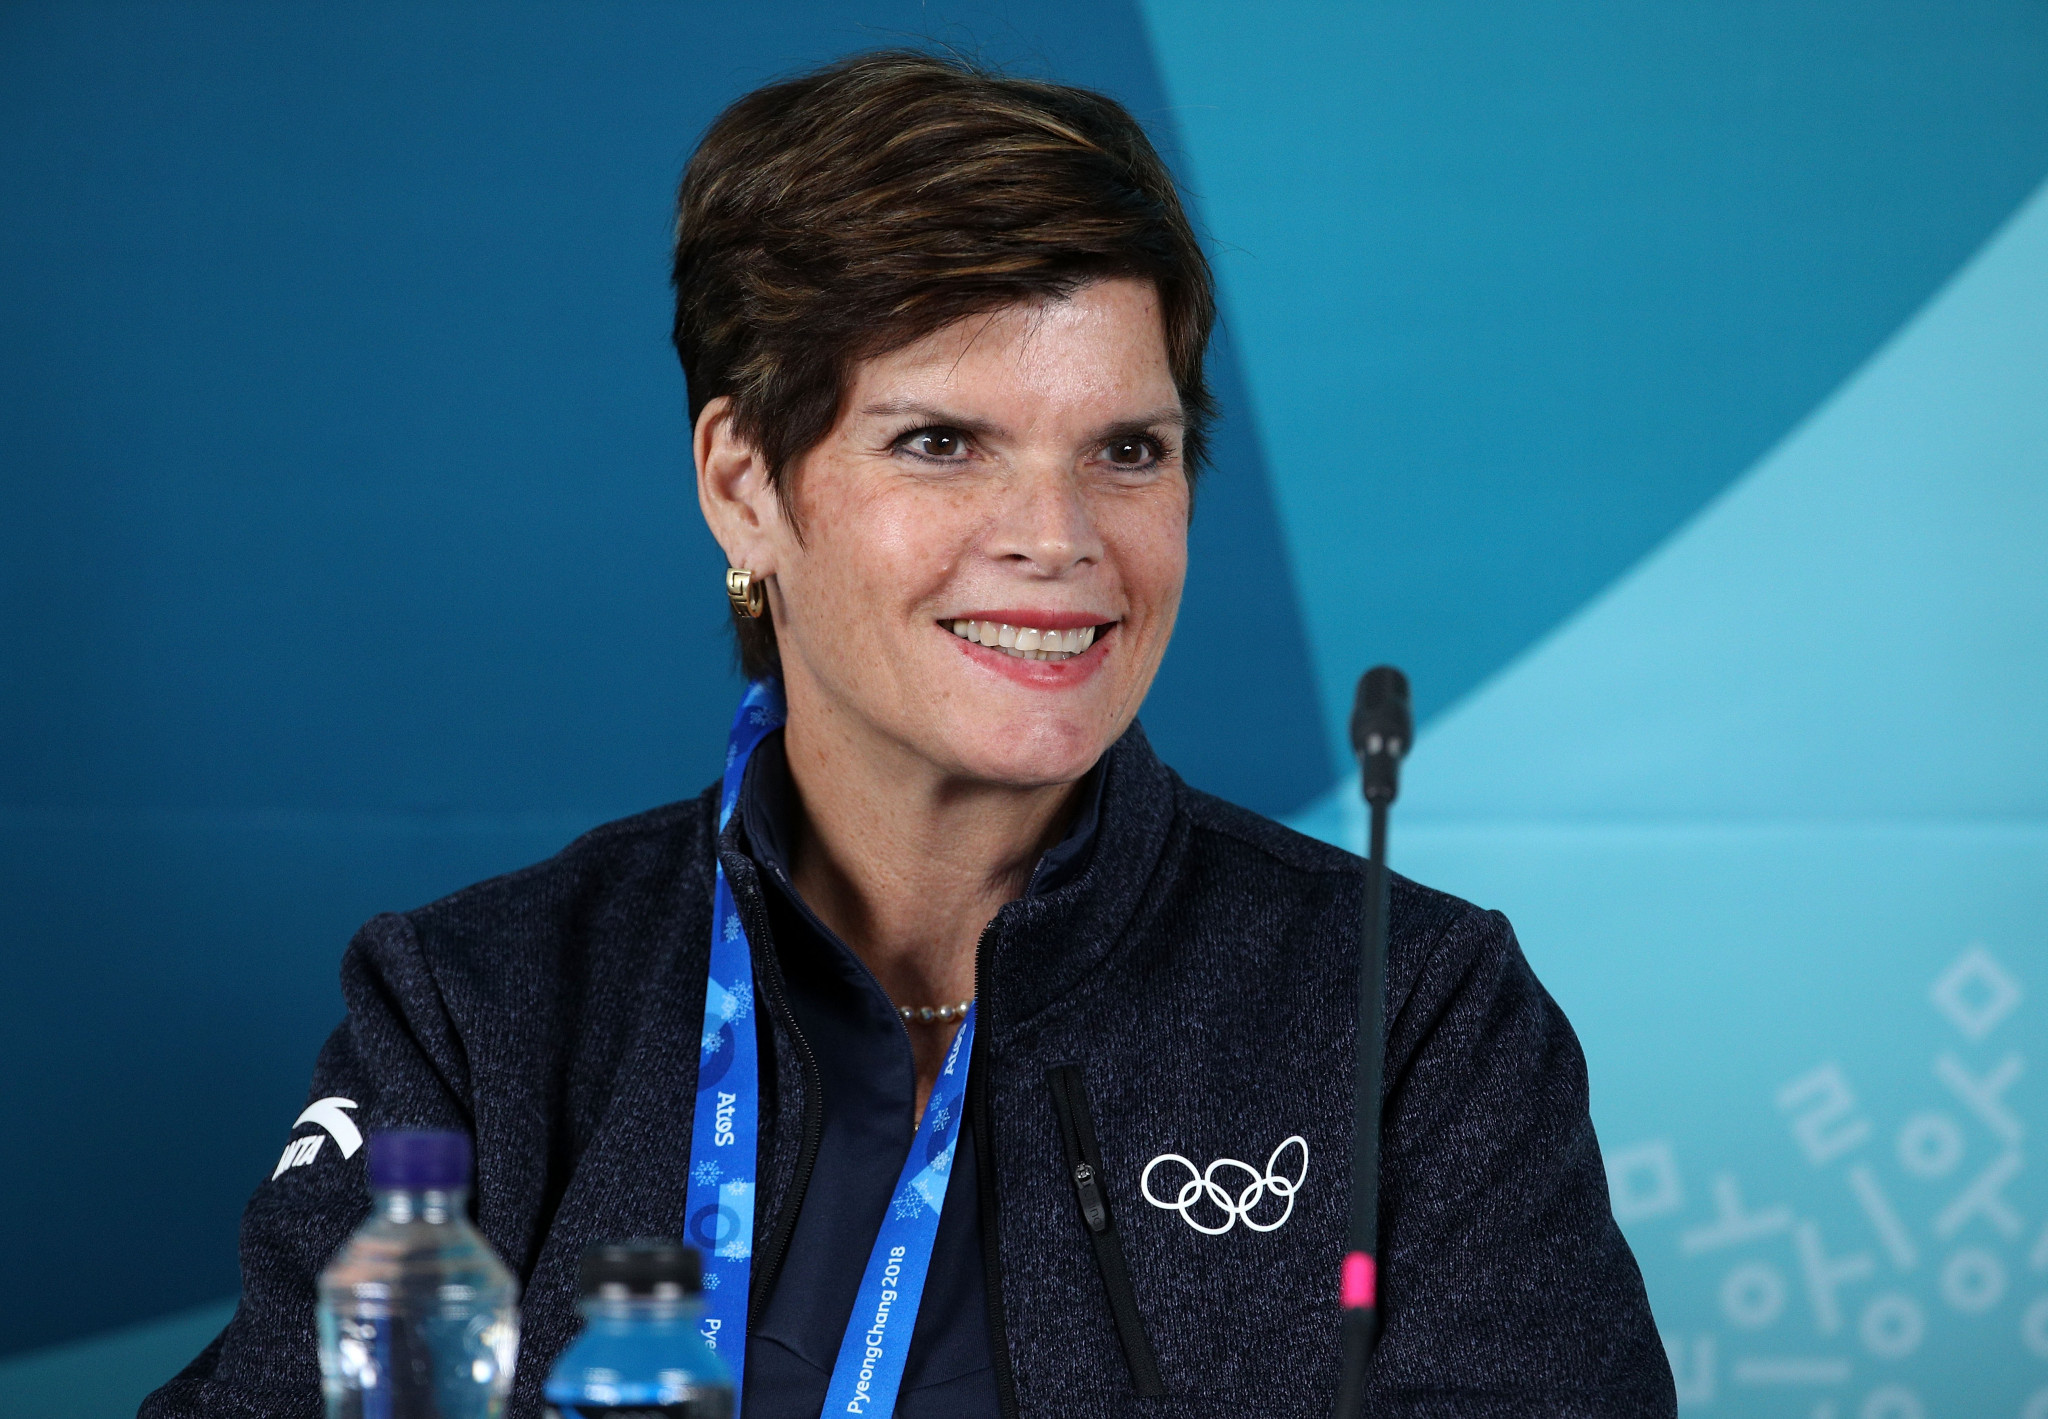 Nicole Hoevertsz has been tipped as a future International Olympic Committee President ©Getty Images